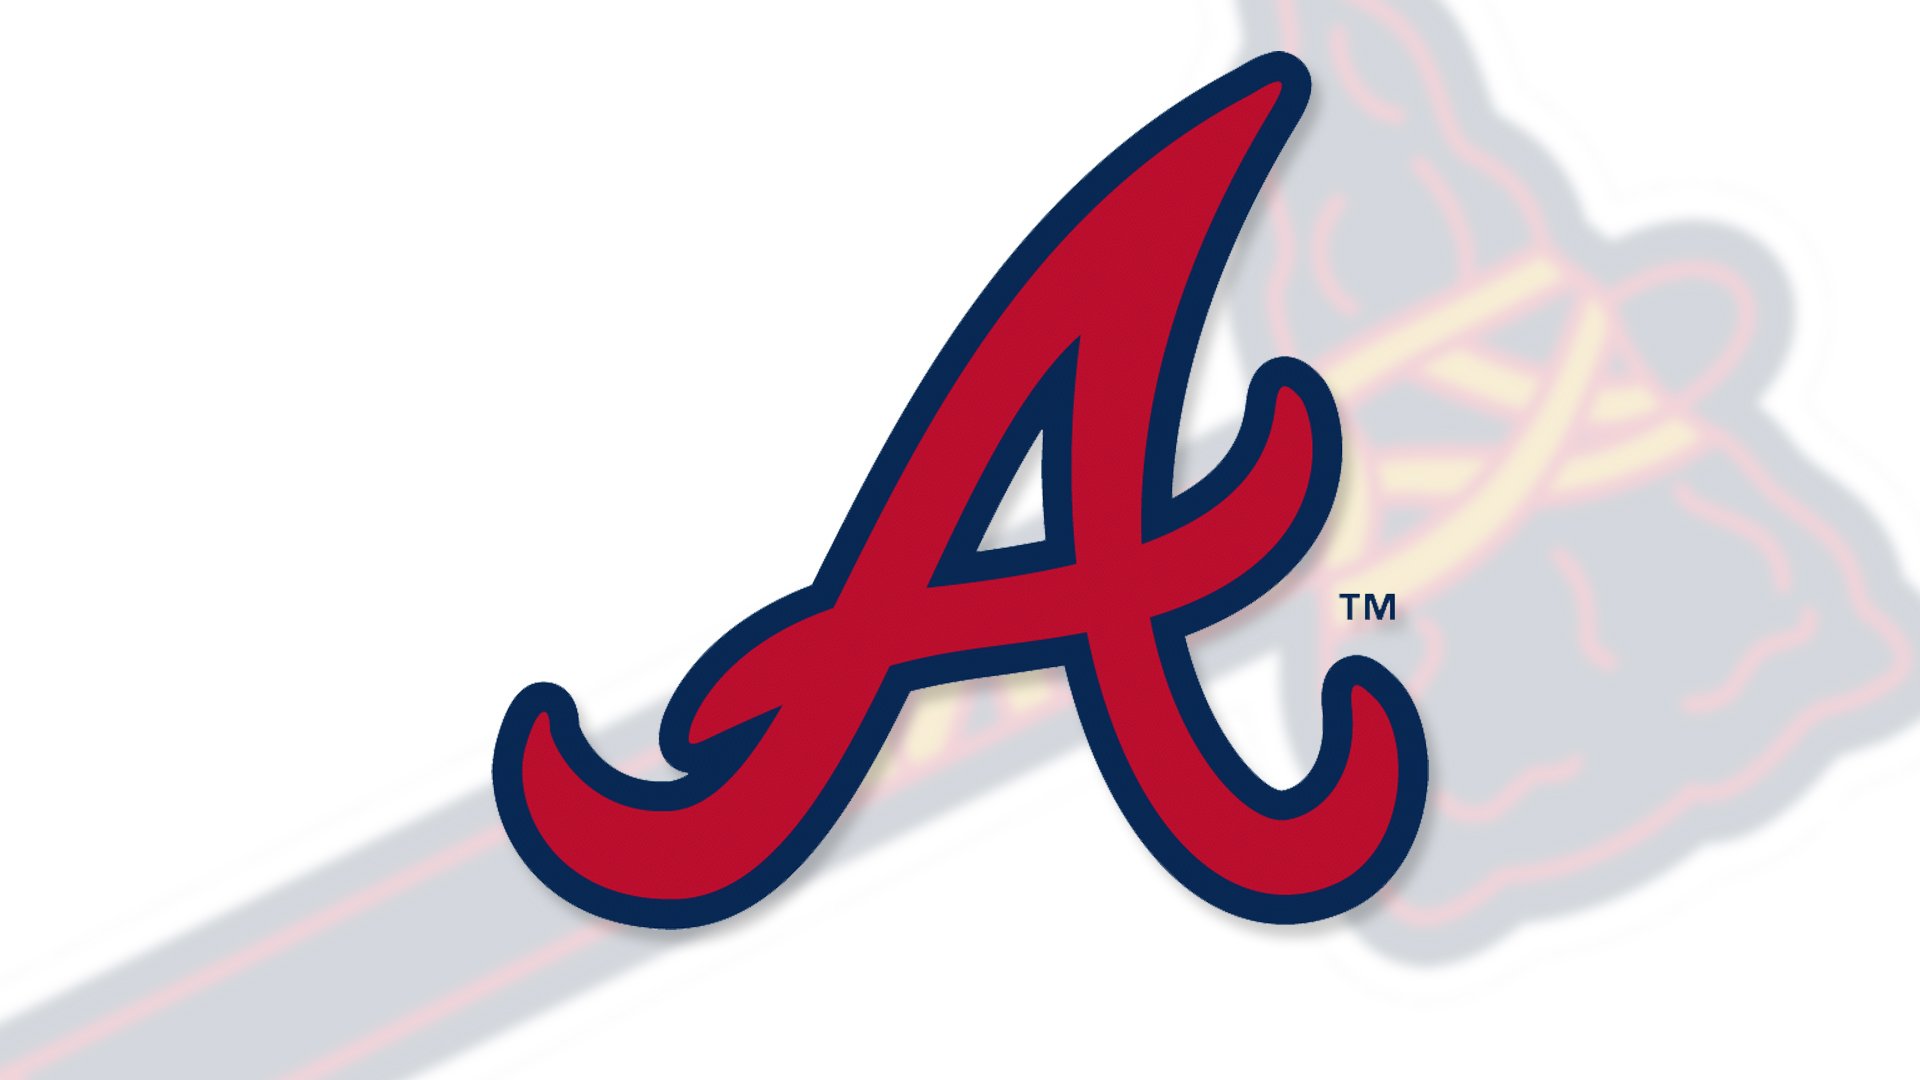 Orlando Arcia is the Atlanta Braves starting shortstop. What is